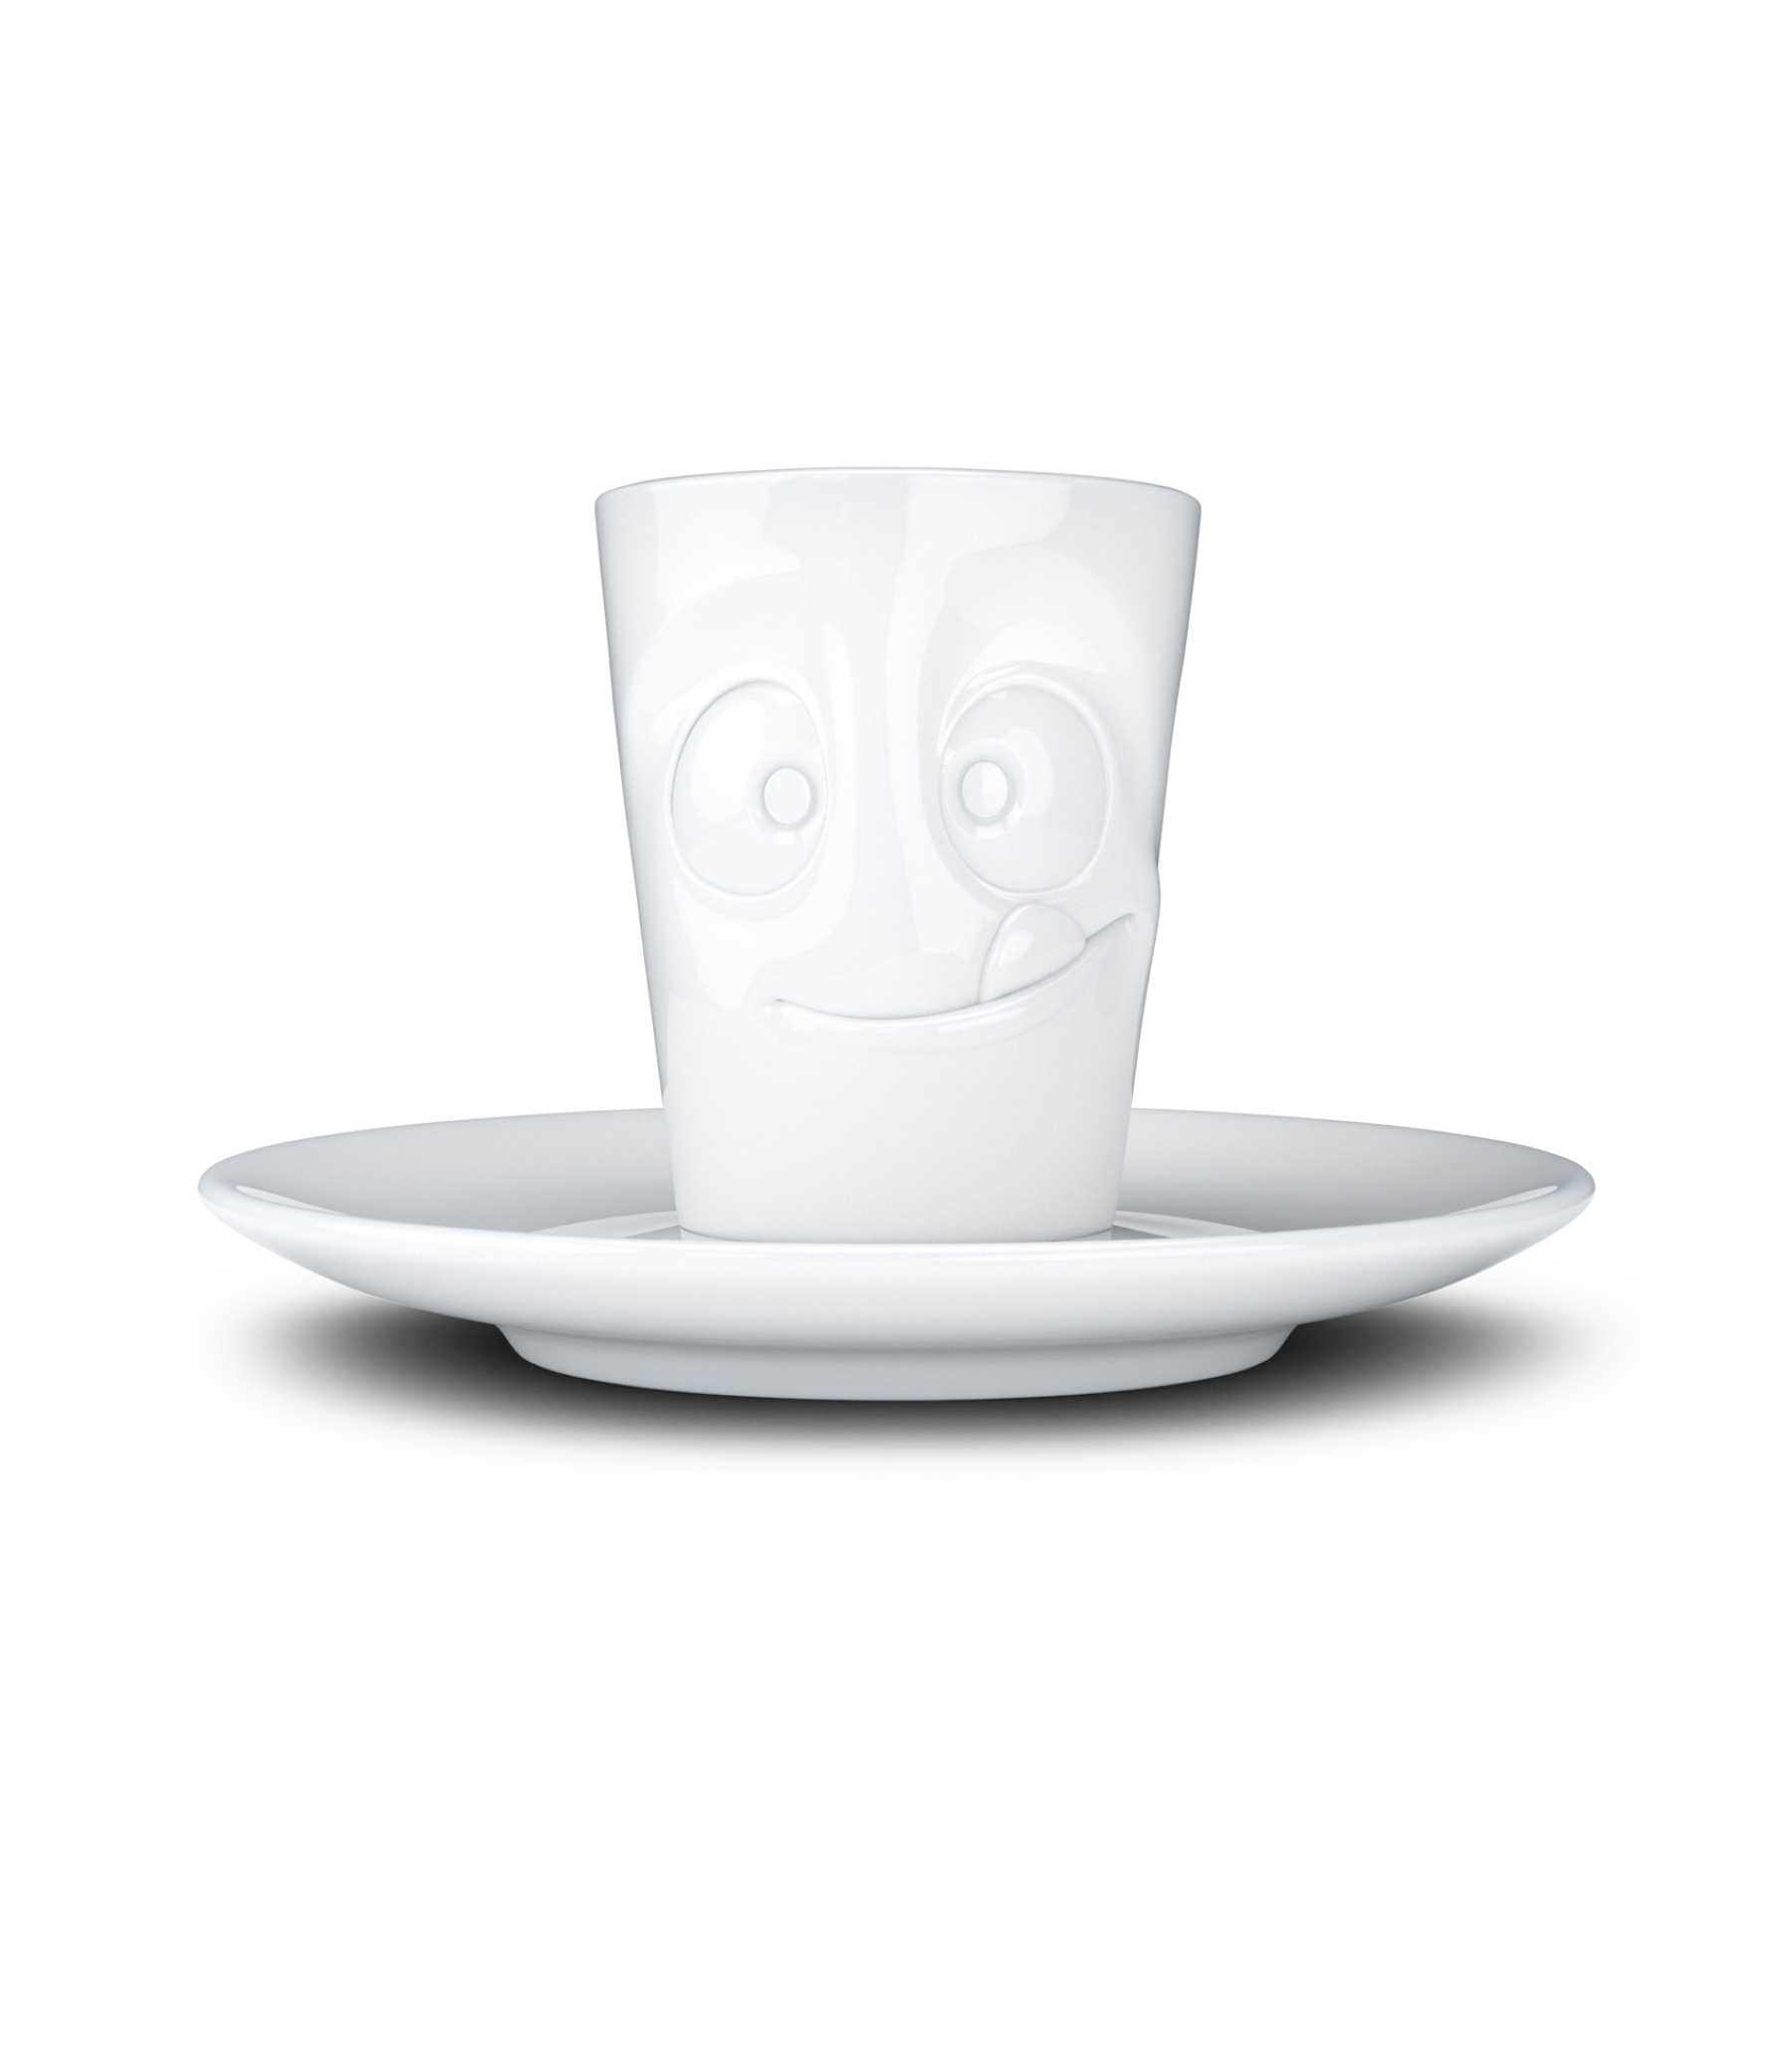 Mug expresso Gourmand avec soucoupe - Tassen by Fiftyeight Products